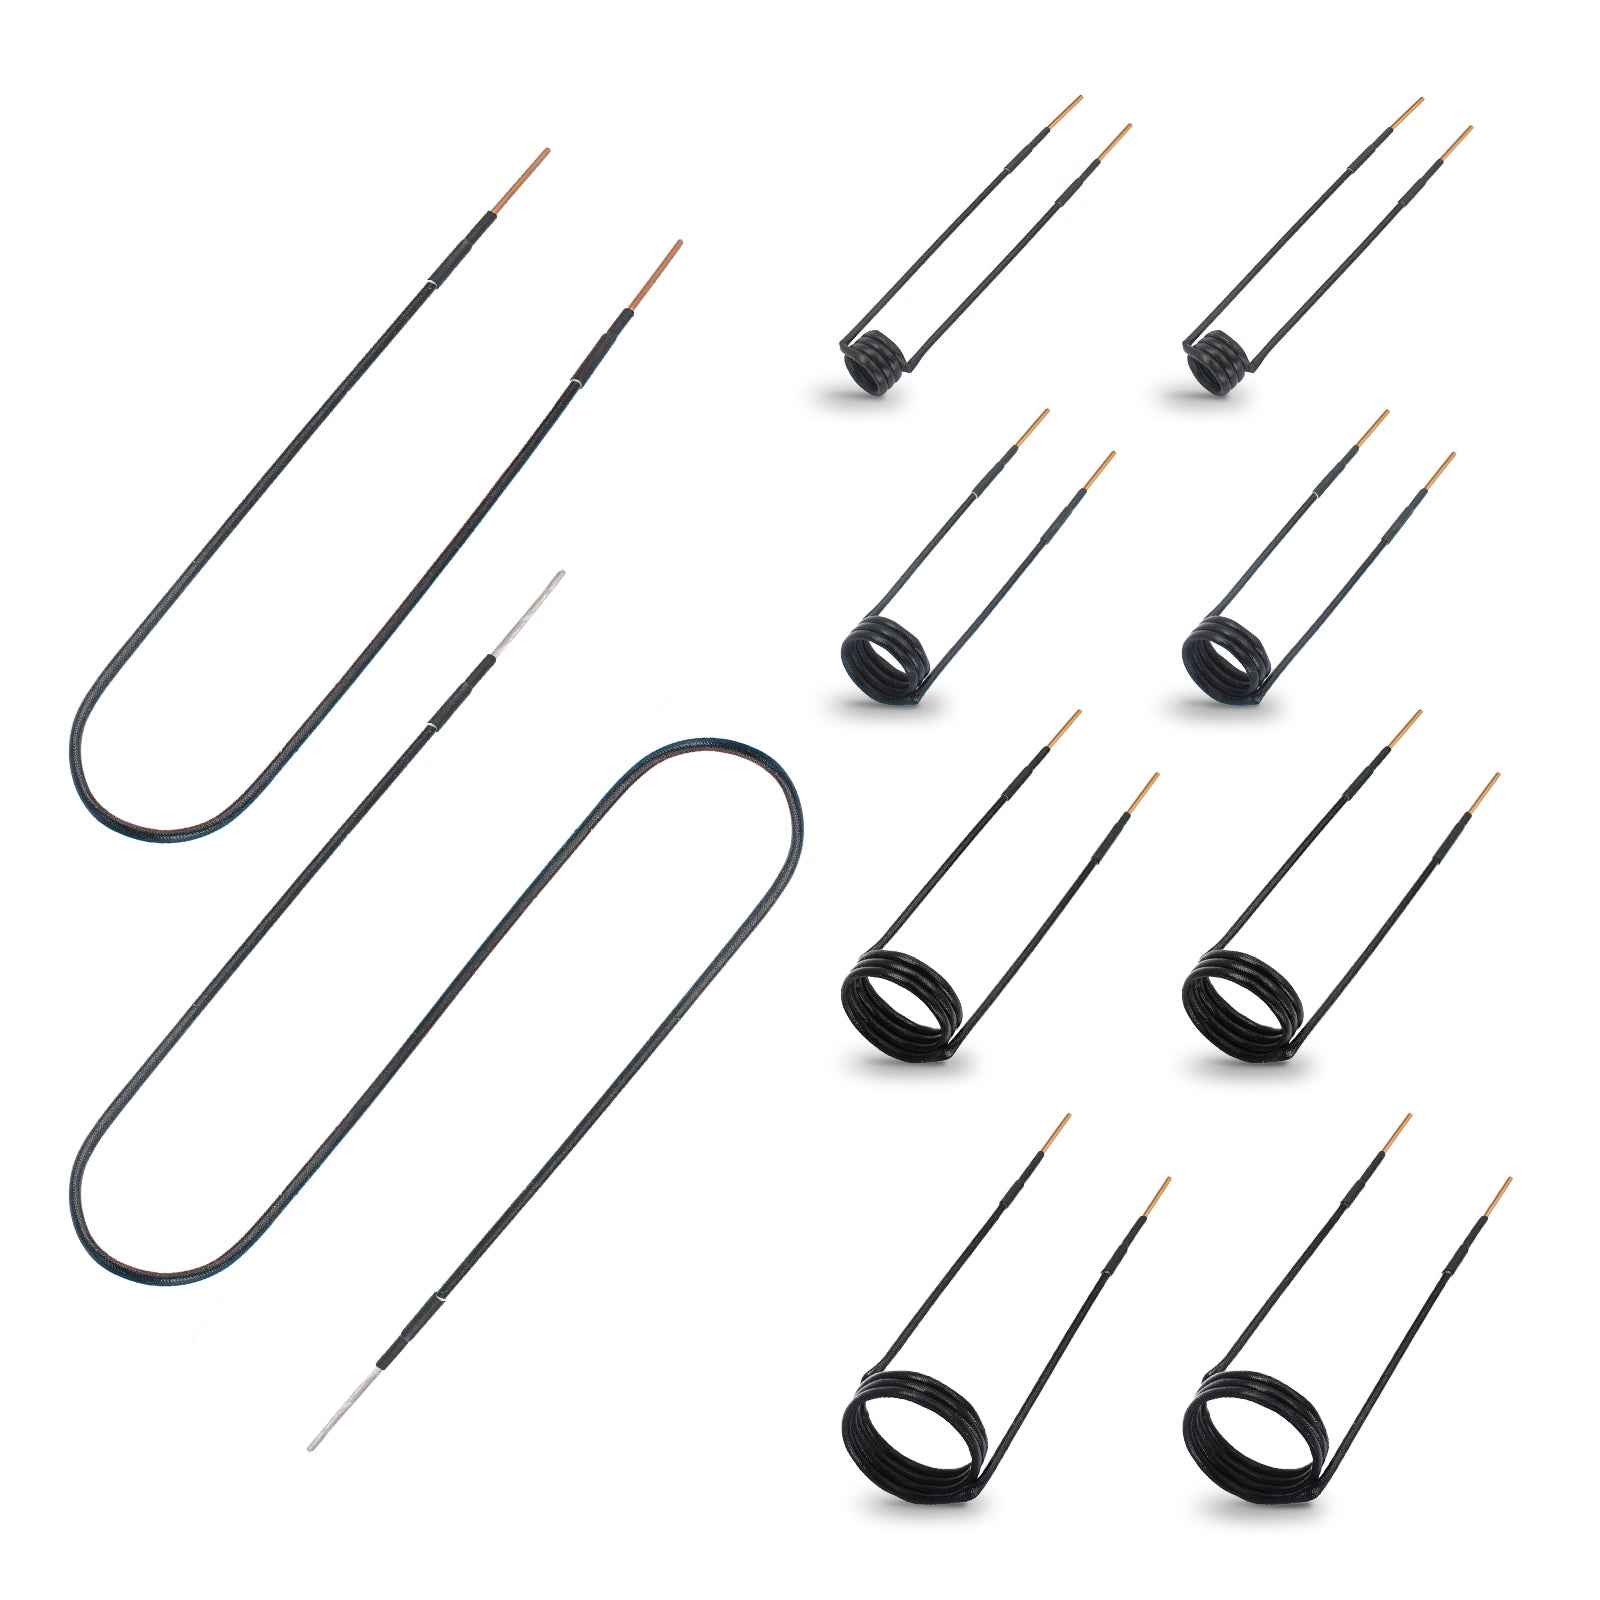 Magnetic Induction Heater Coil Kit - 10PCS Flameless Induction Heat Accessor for Removing Rusty Bolts and Nuts - B - Auto Body Collision Repair Welding Products